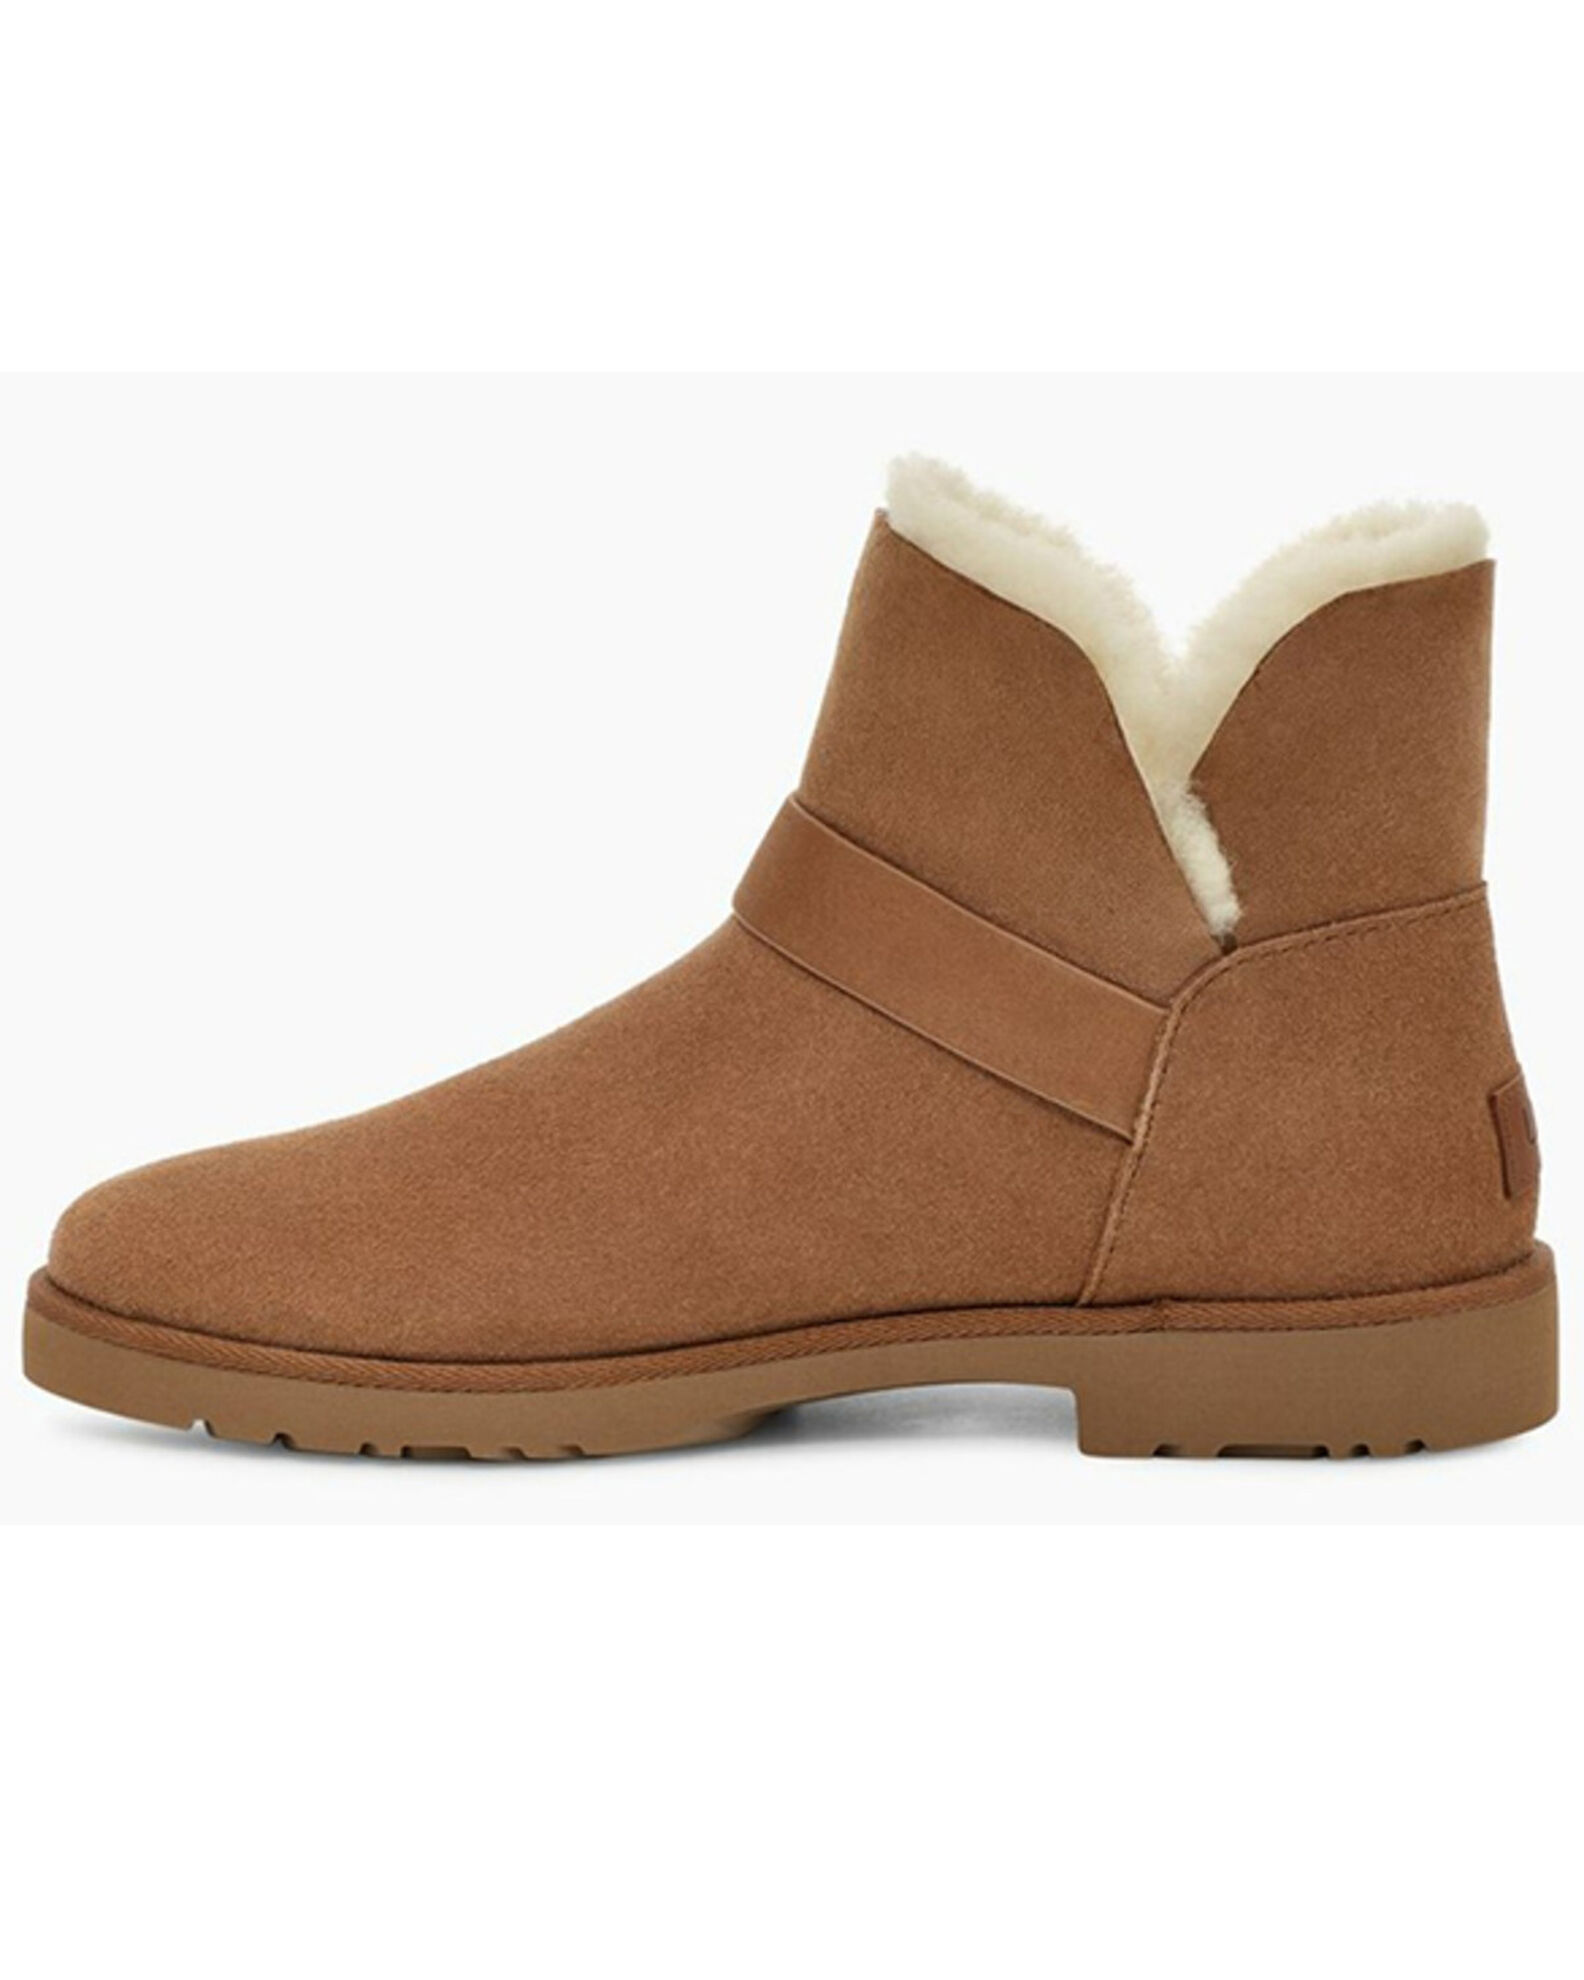 UGG Women's Romely Short Buckle Boots - Round Toe